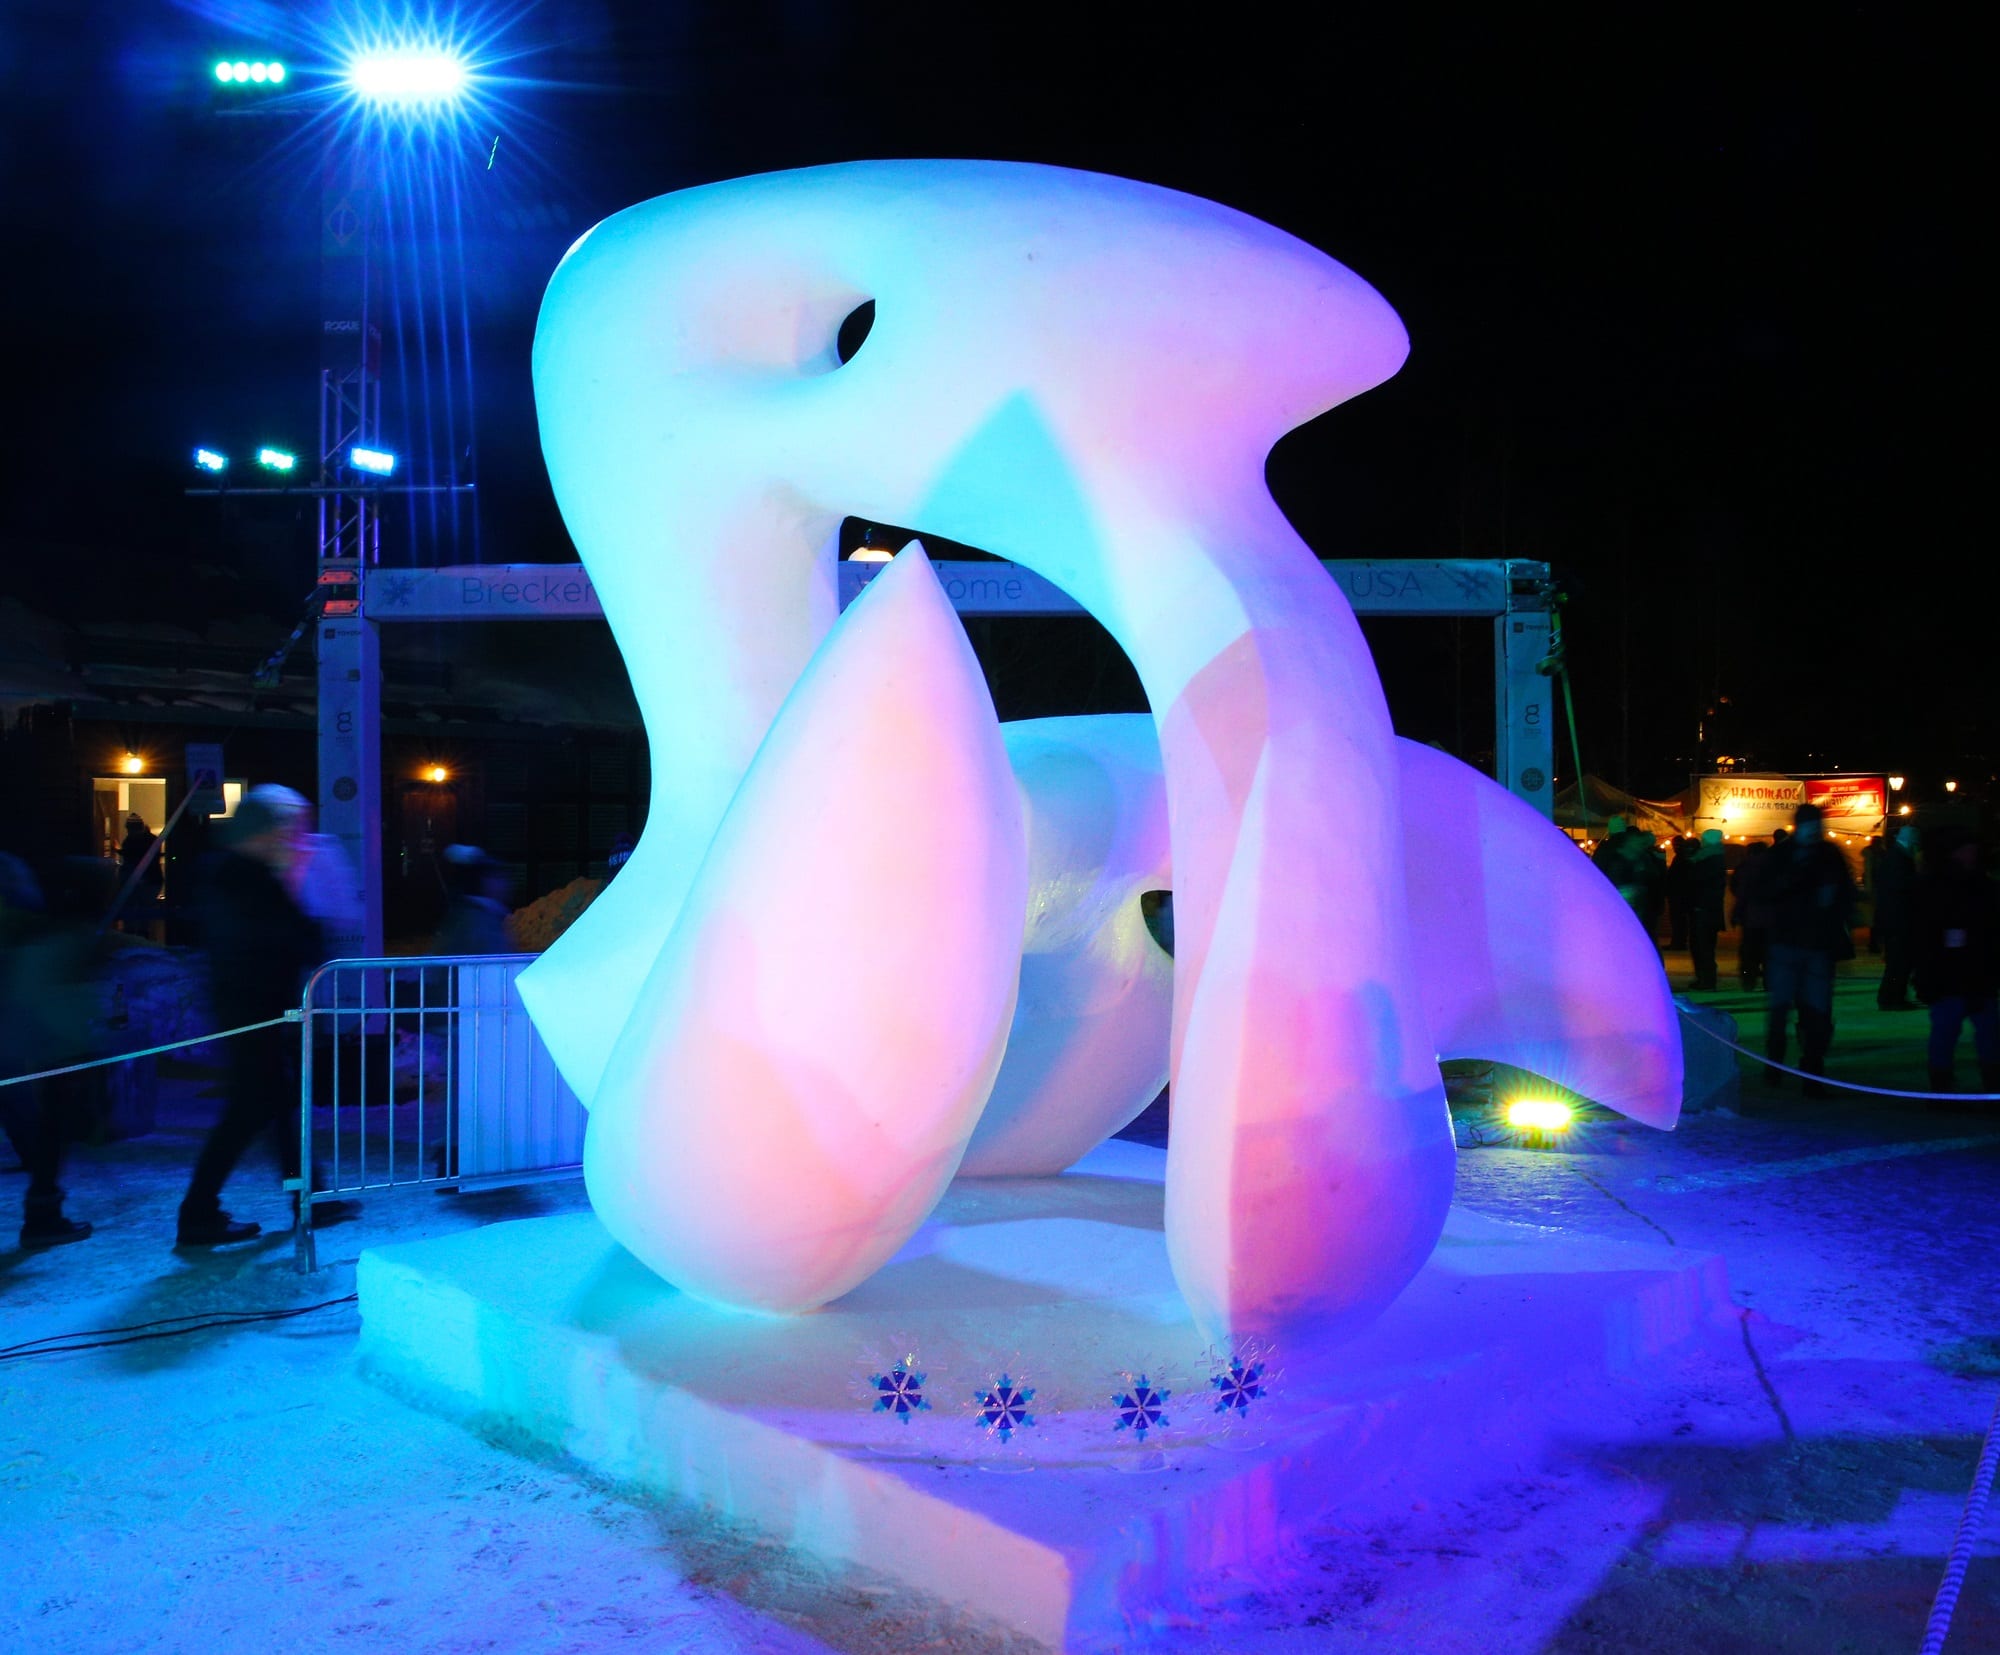 Entry for the 2019 International Snow Sculpture Championships